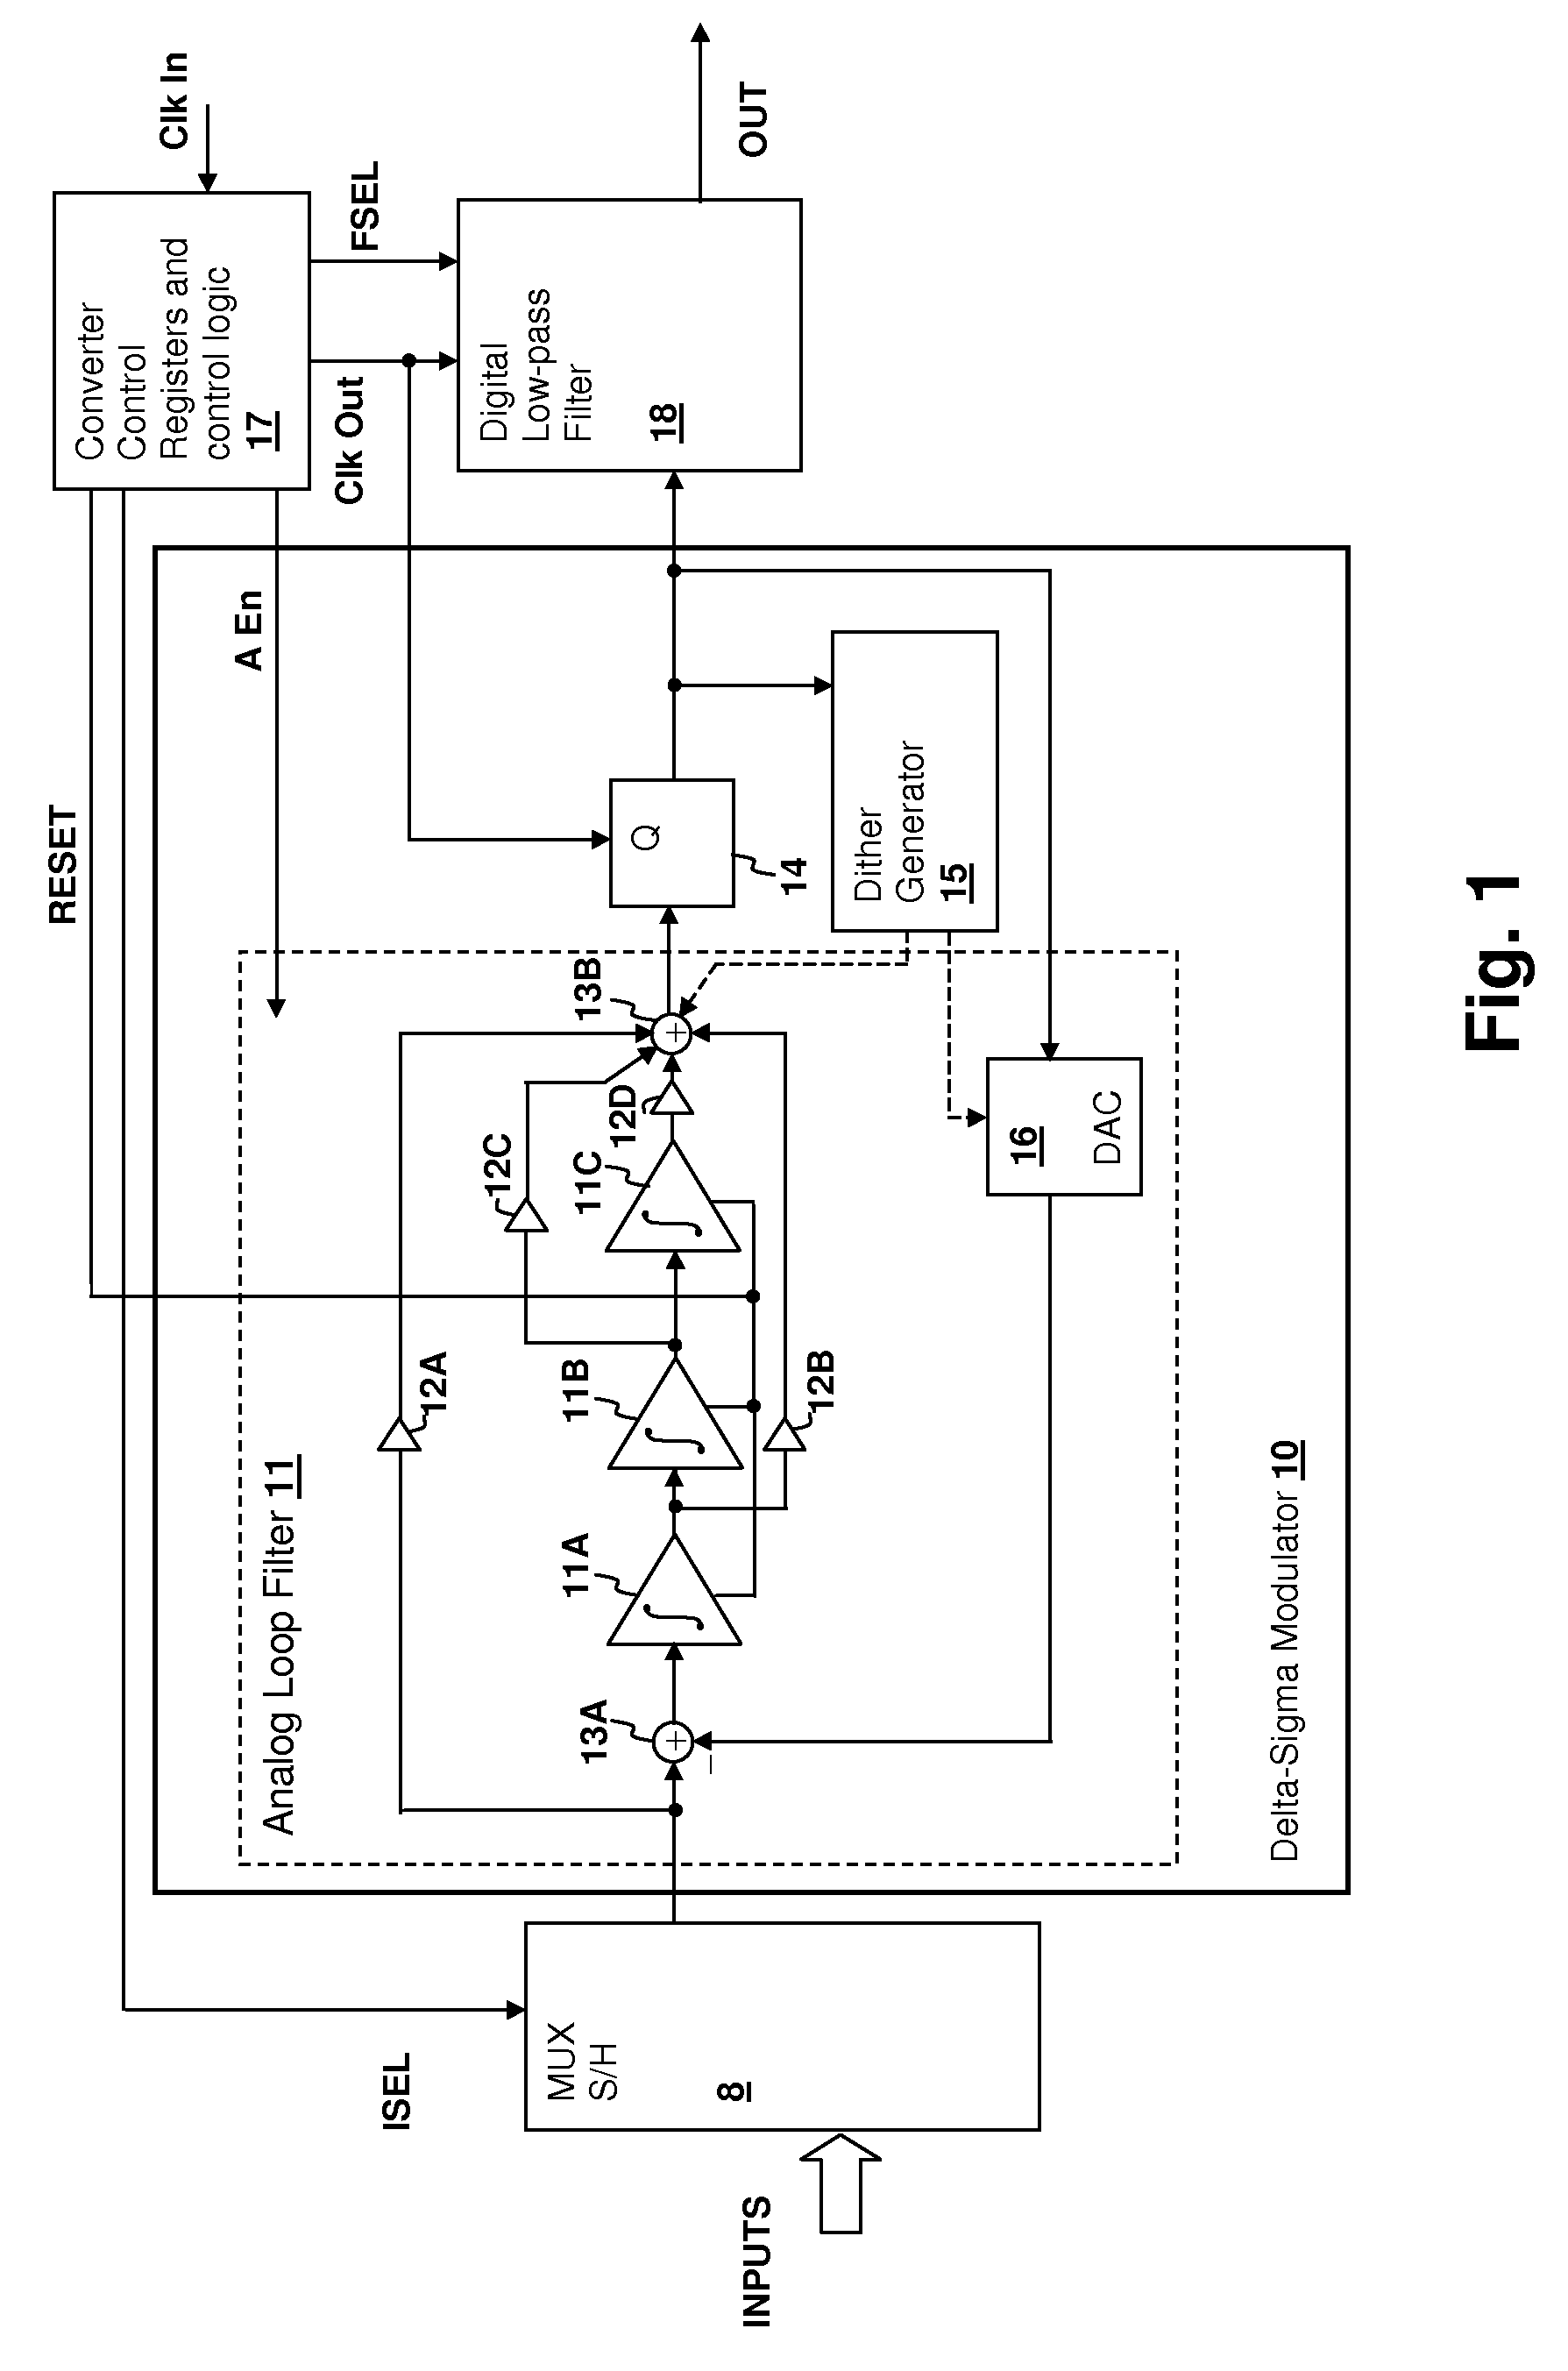 Delta-sigma analog-to-digital converter (ADC) having an intermittent power-down state between conversion cycles